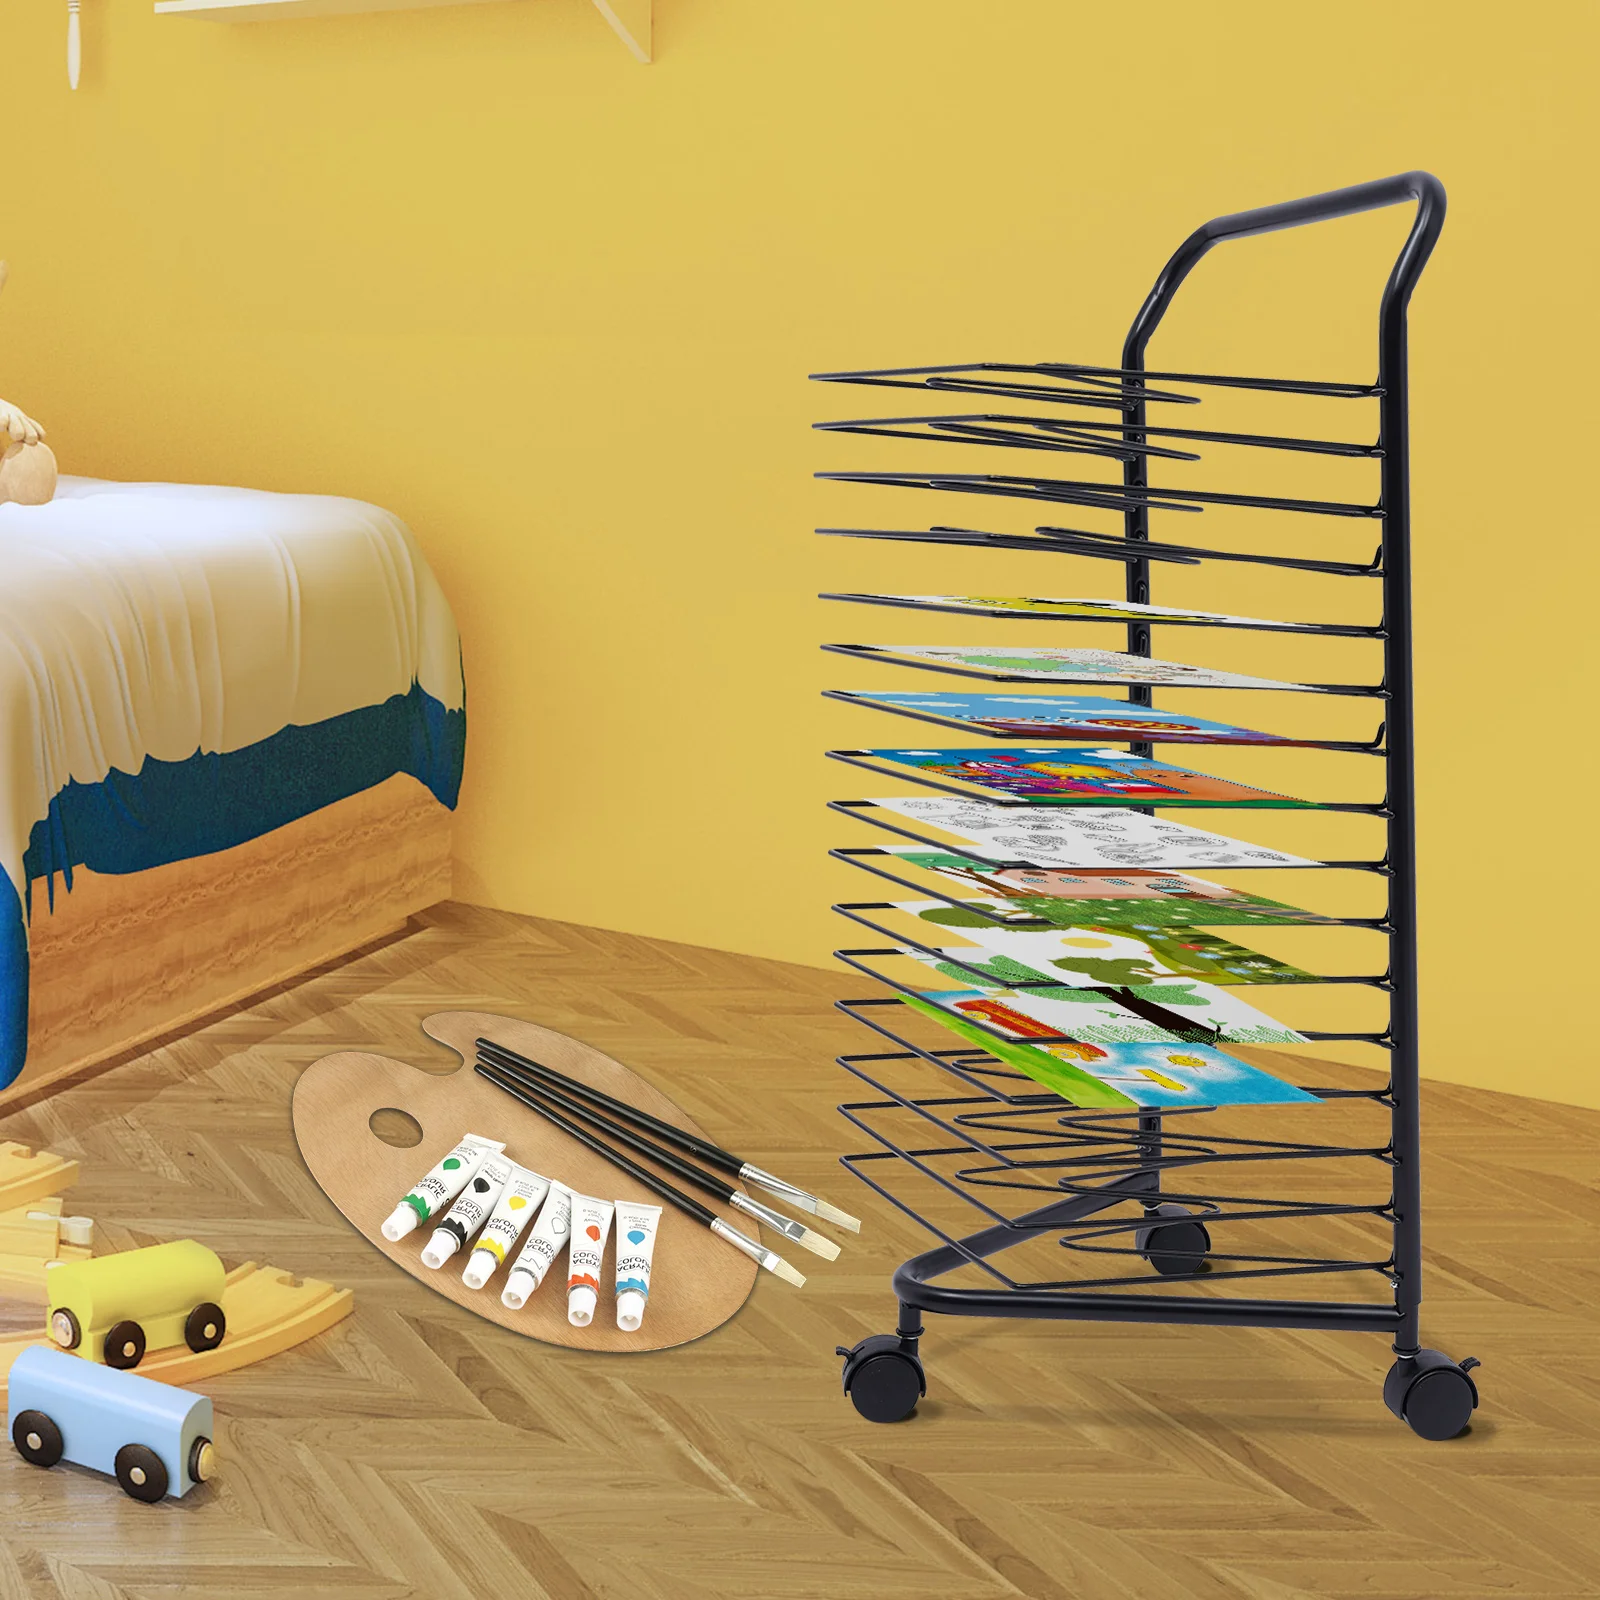 

Art Drying Rack 16 Shelves Ideal For Schools And Art Clubs Height 33 Inches For Classroom Paint